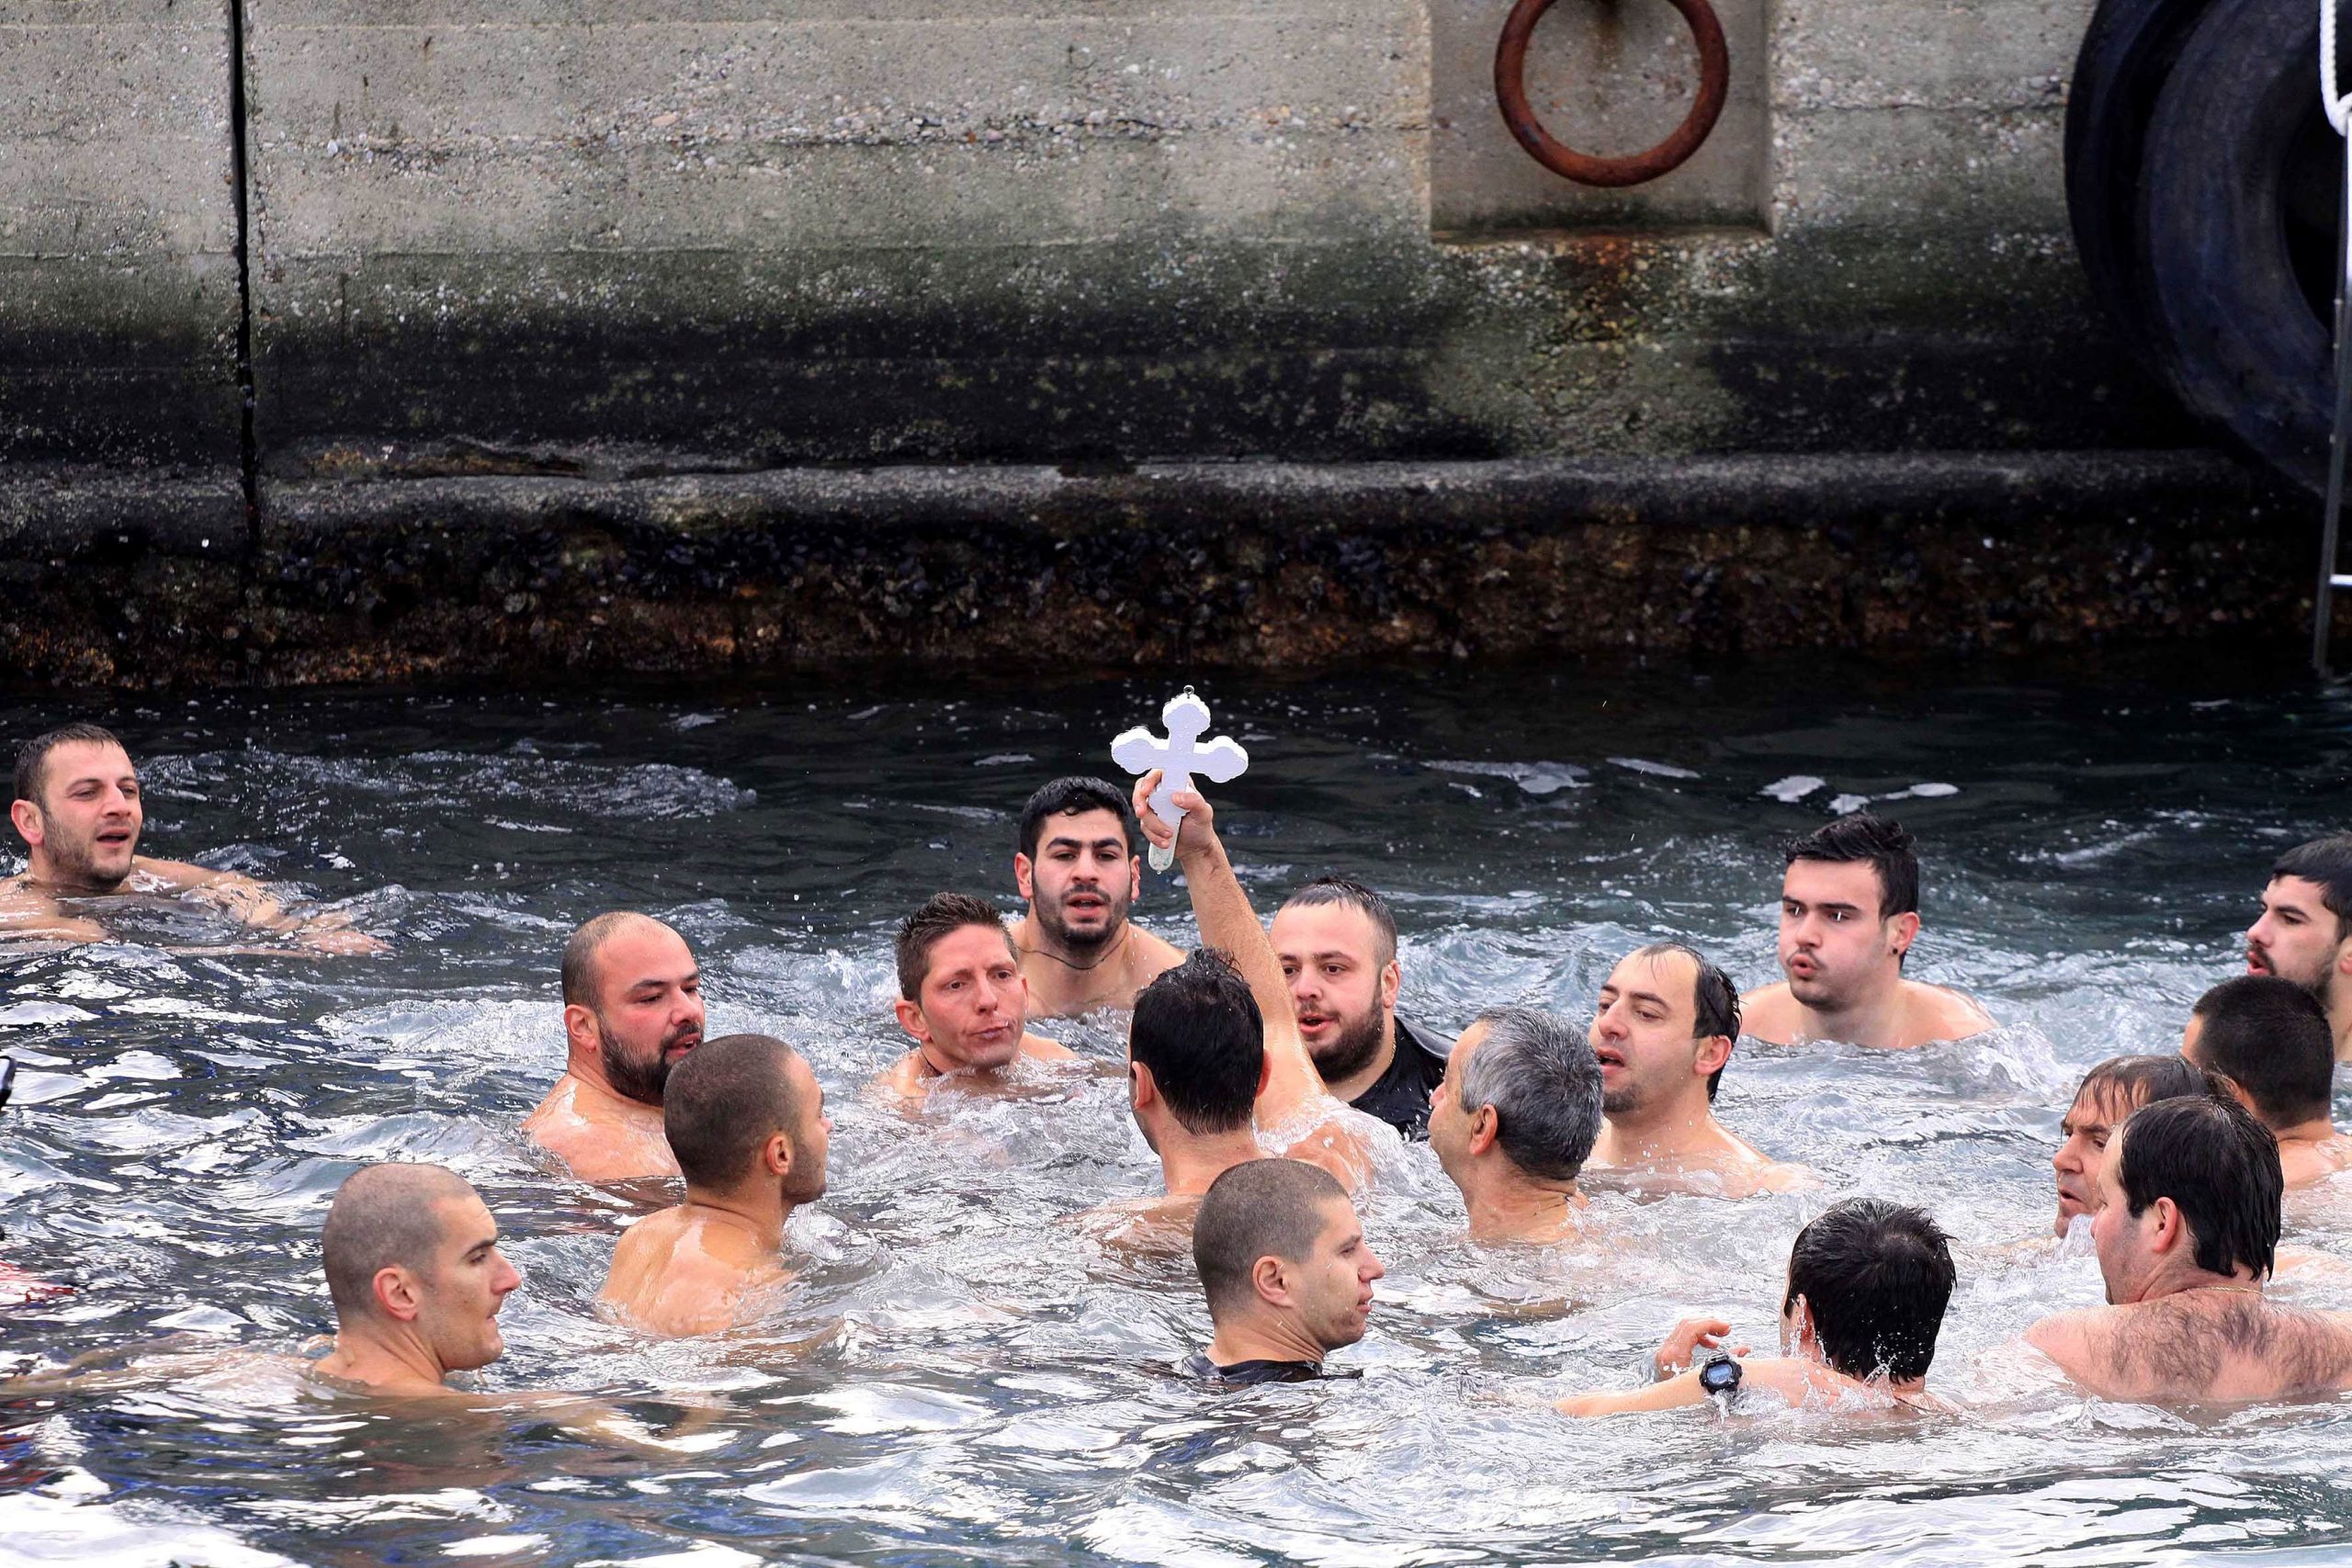 About the Jan. 6 Epiphany Tradition – Theophania – in Greece